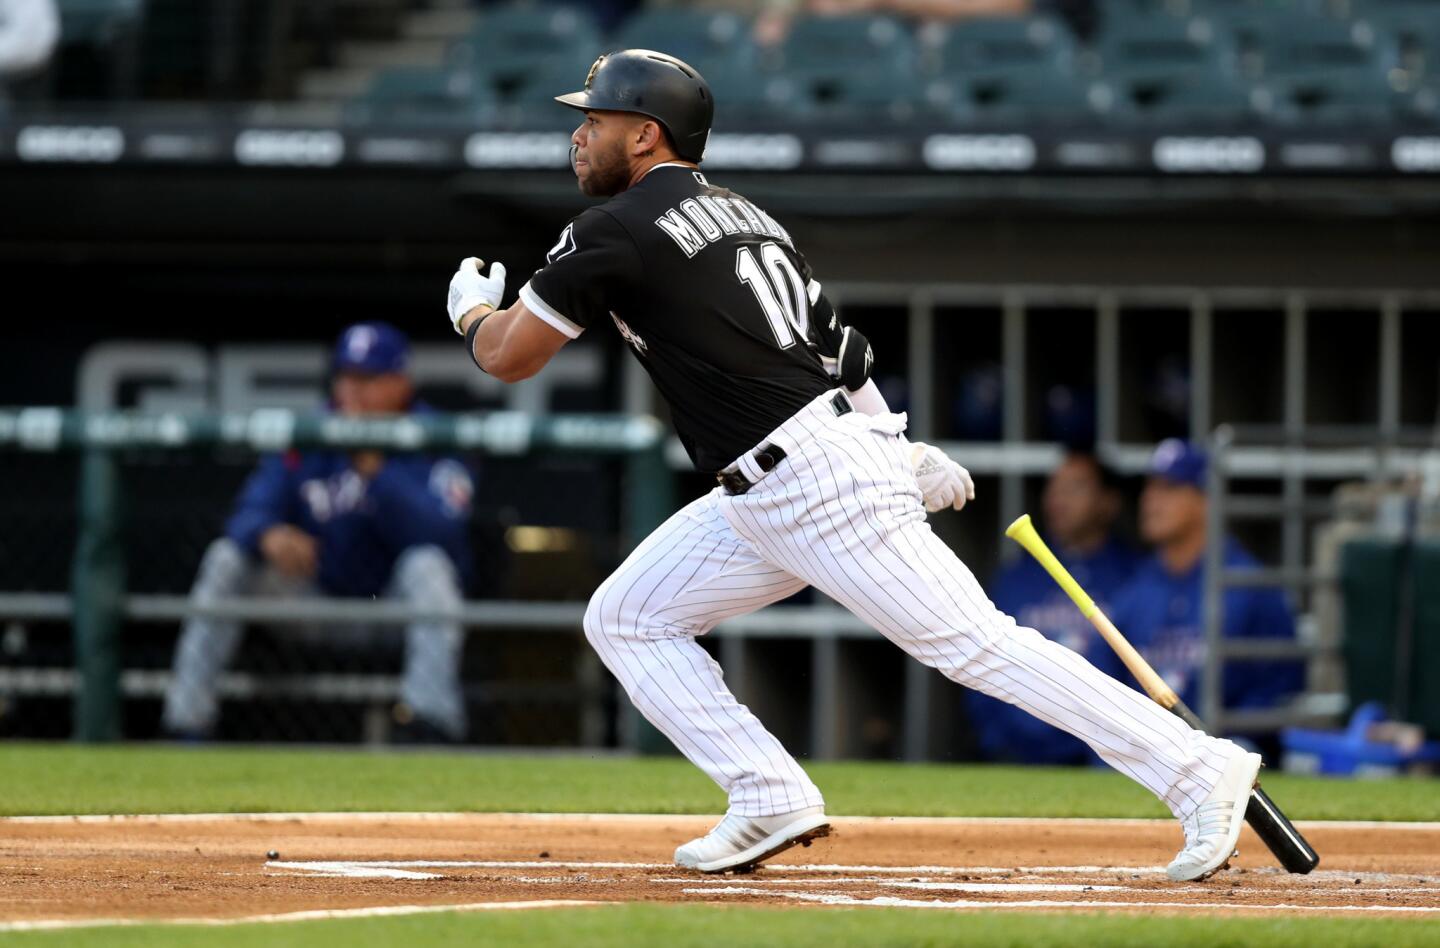 Yoan Moncada sprints to first base with a single in the first inning against the Rangers at Guaranteed Rate Field on Thursday, May 17, 2018.